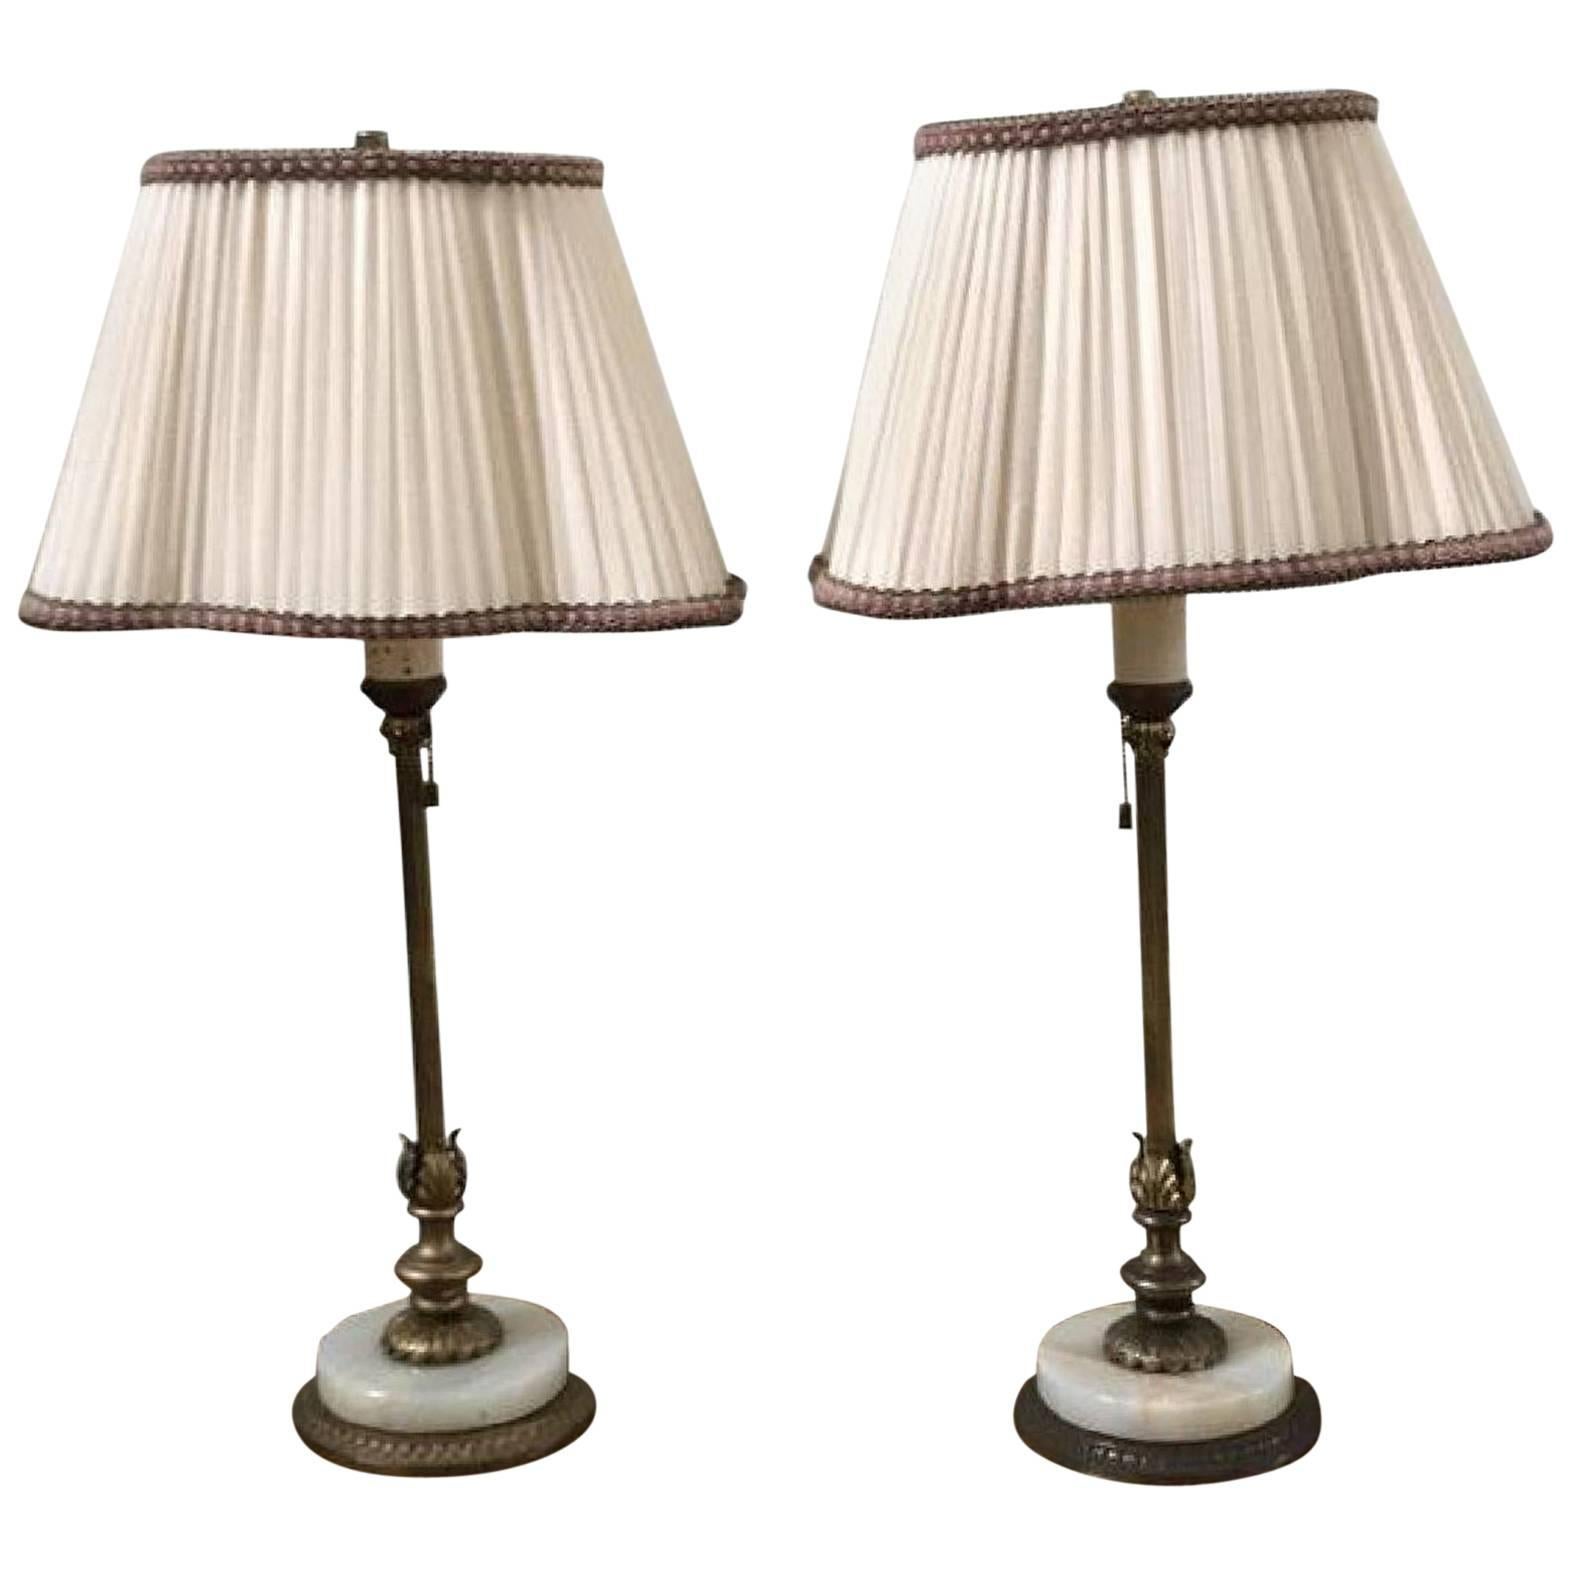 Pair of Hollywood Regency Marble Base Table Lamps